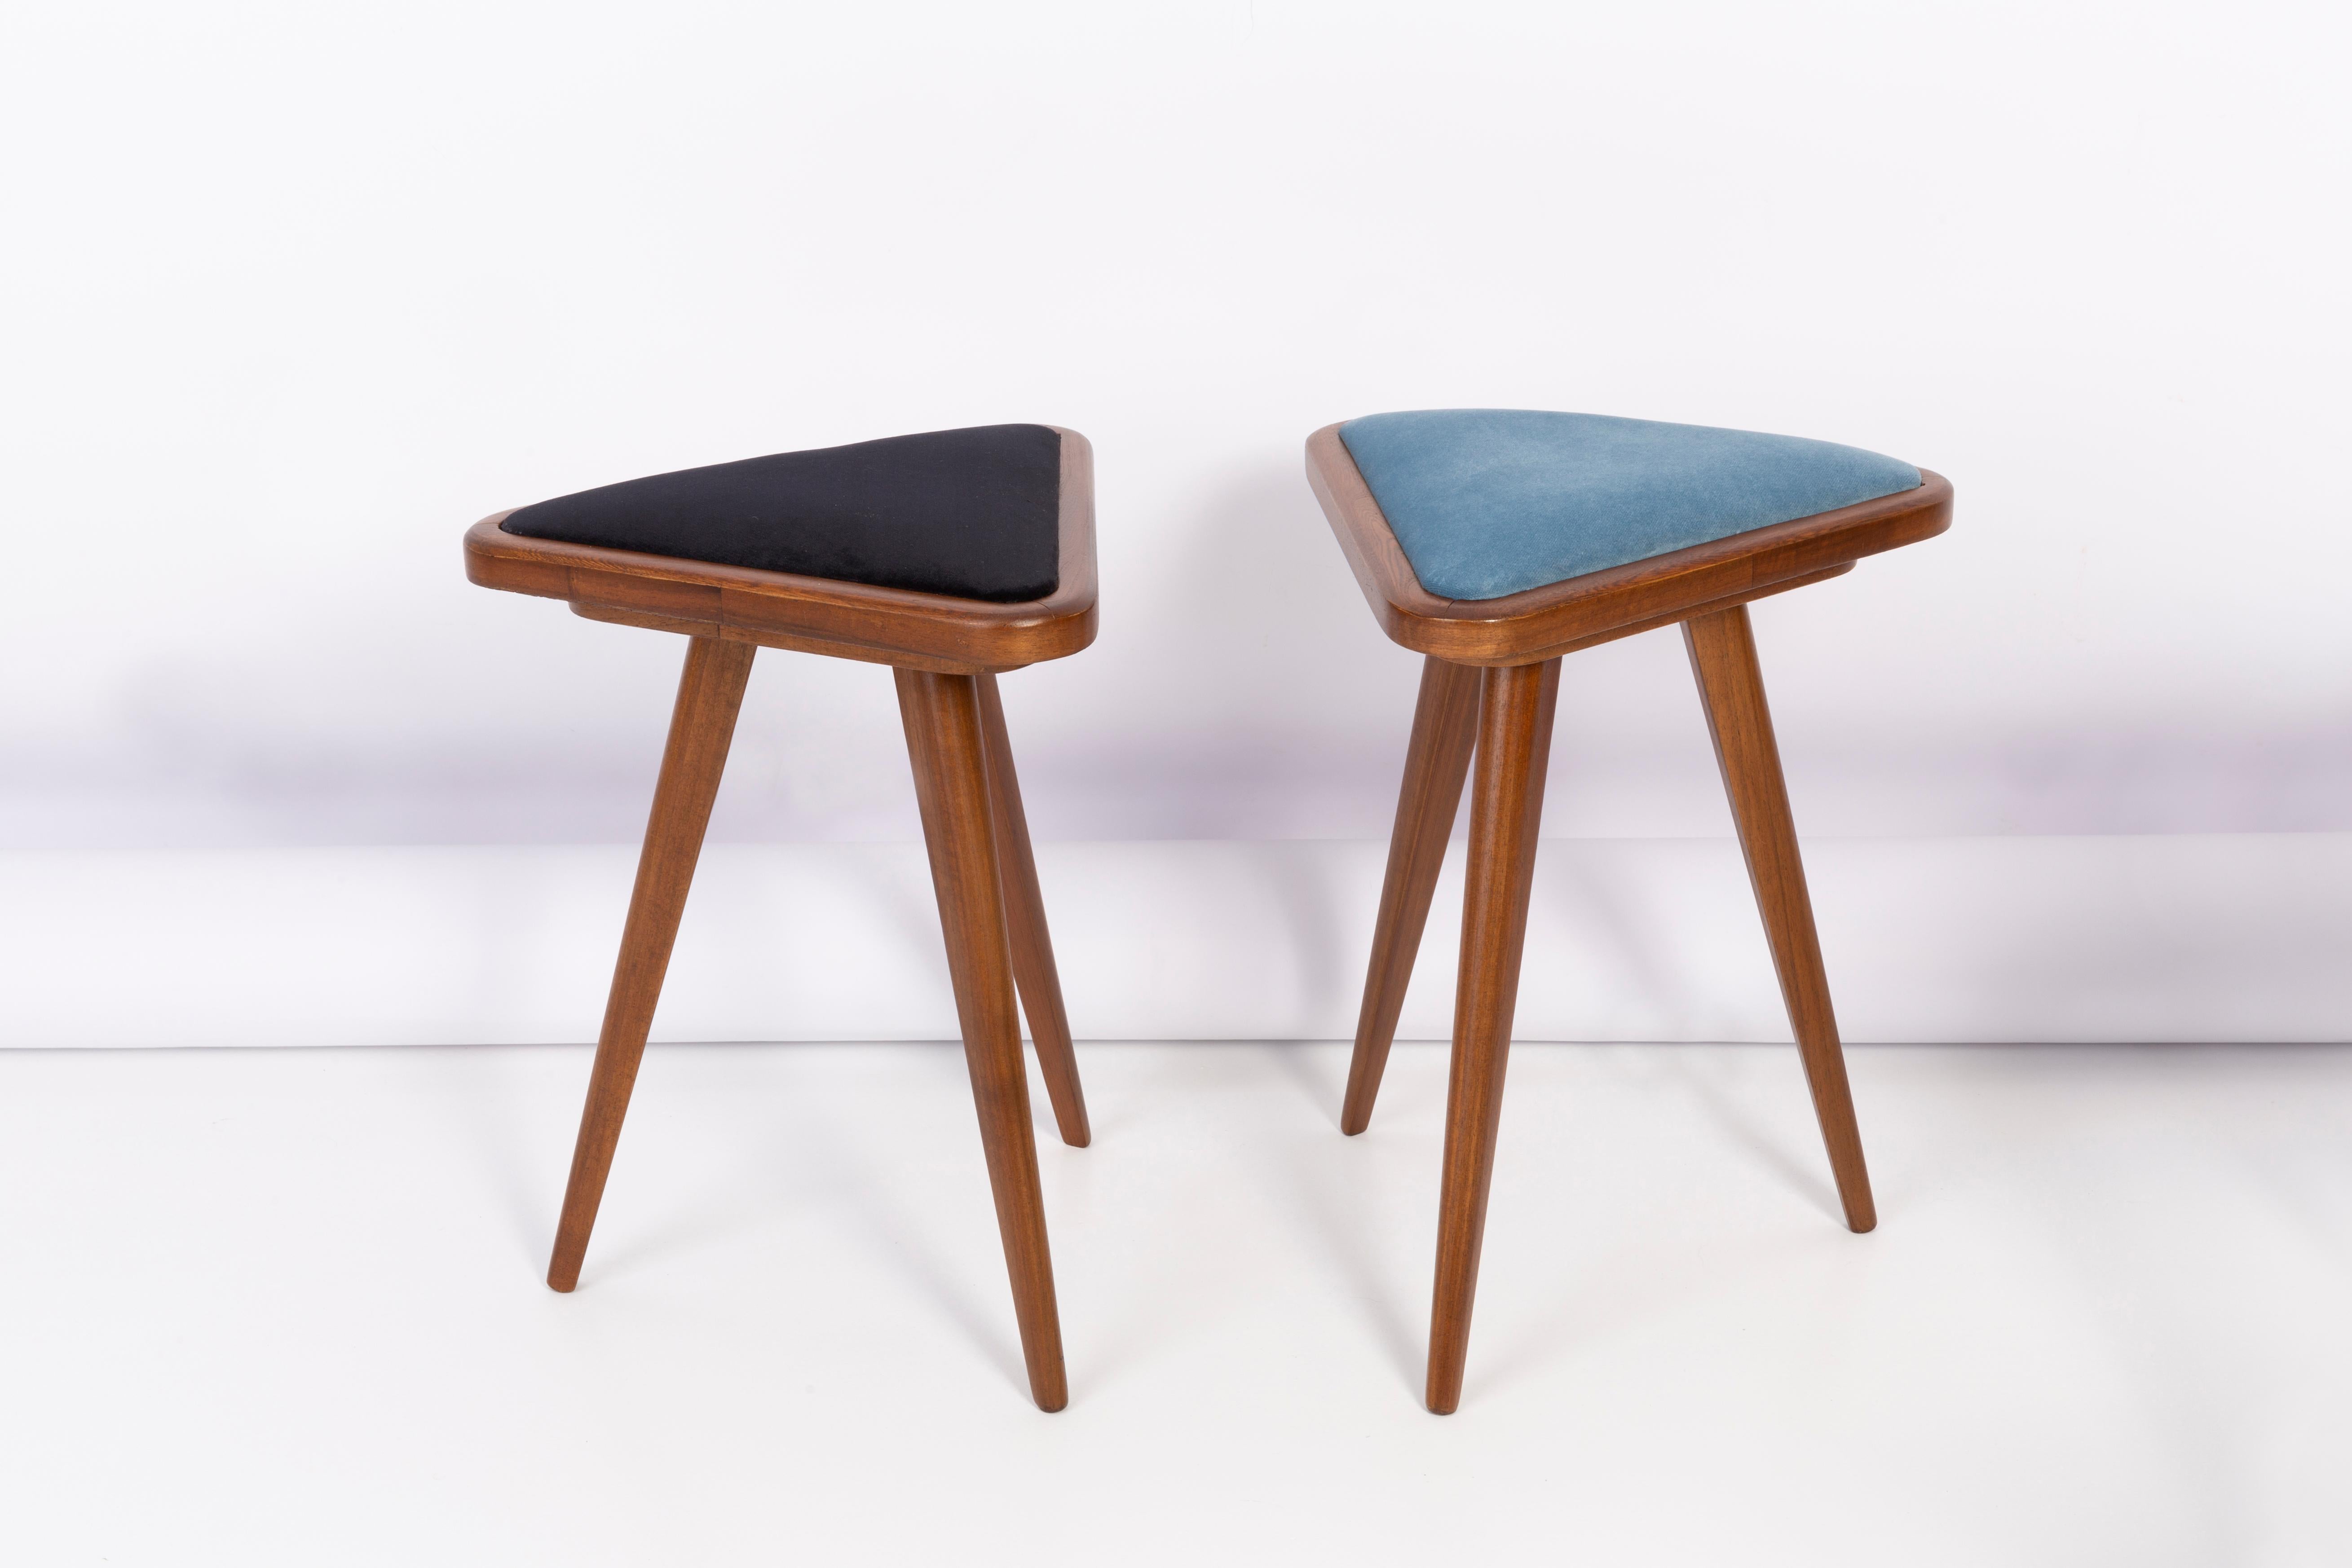 Stools from the turn of the 1960s and 1970s. Beautiful velour upholstery in 2 different colors. The stools consist of an upholstered part, a seat and wooden legs narrowing downwards, characteristic of the 1960s style. They are absolutely